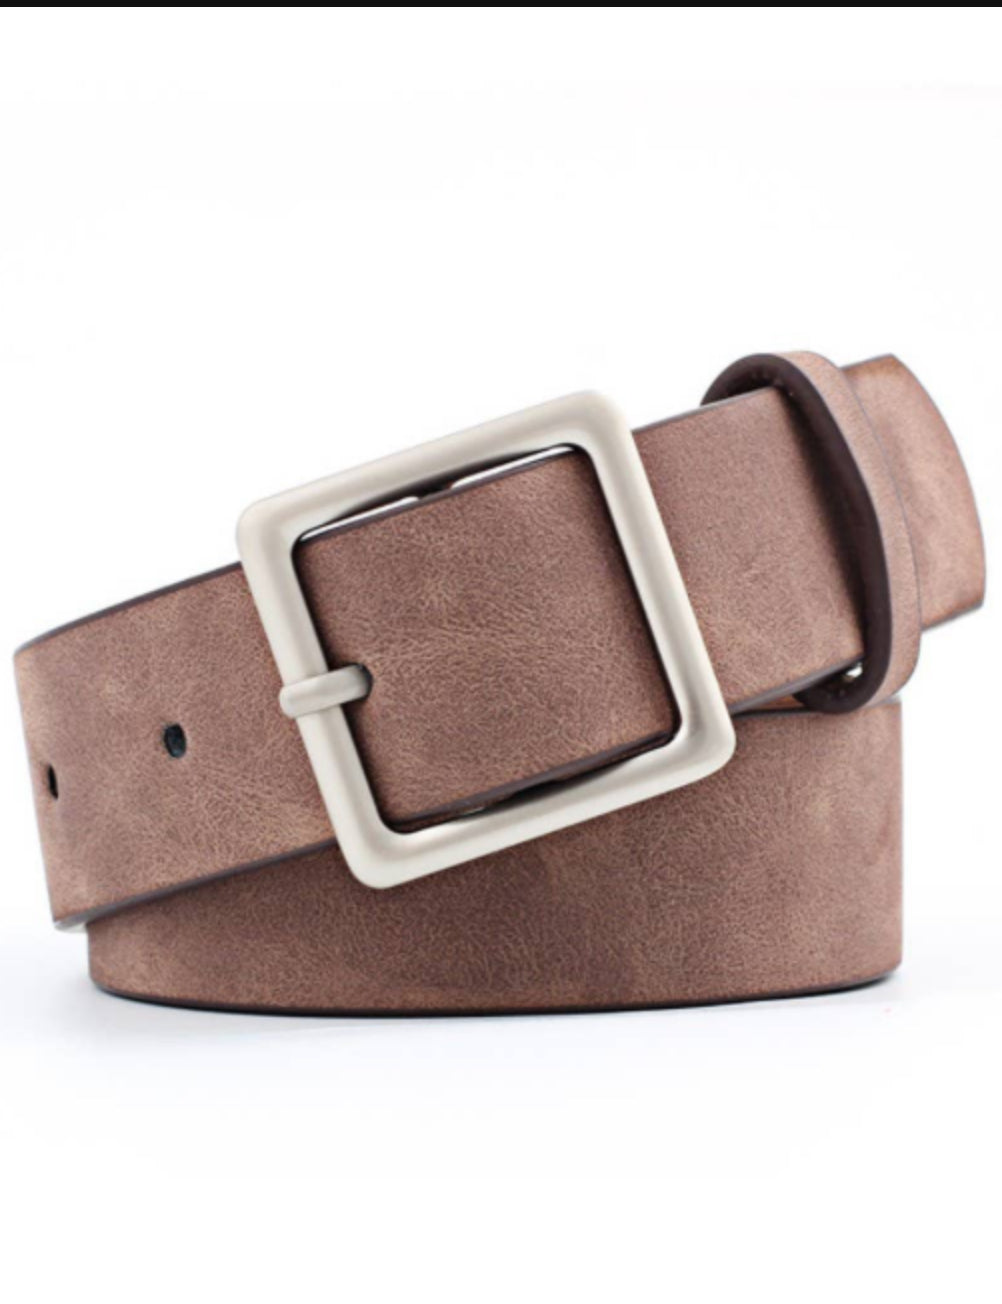 Basic Belt with Square Buckle - 2 Colors